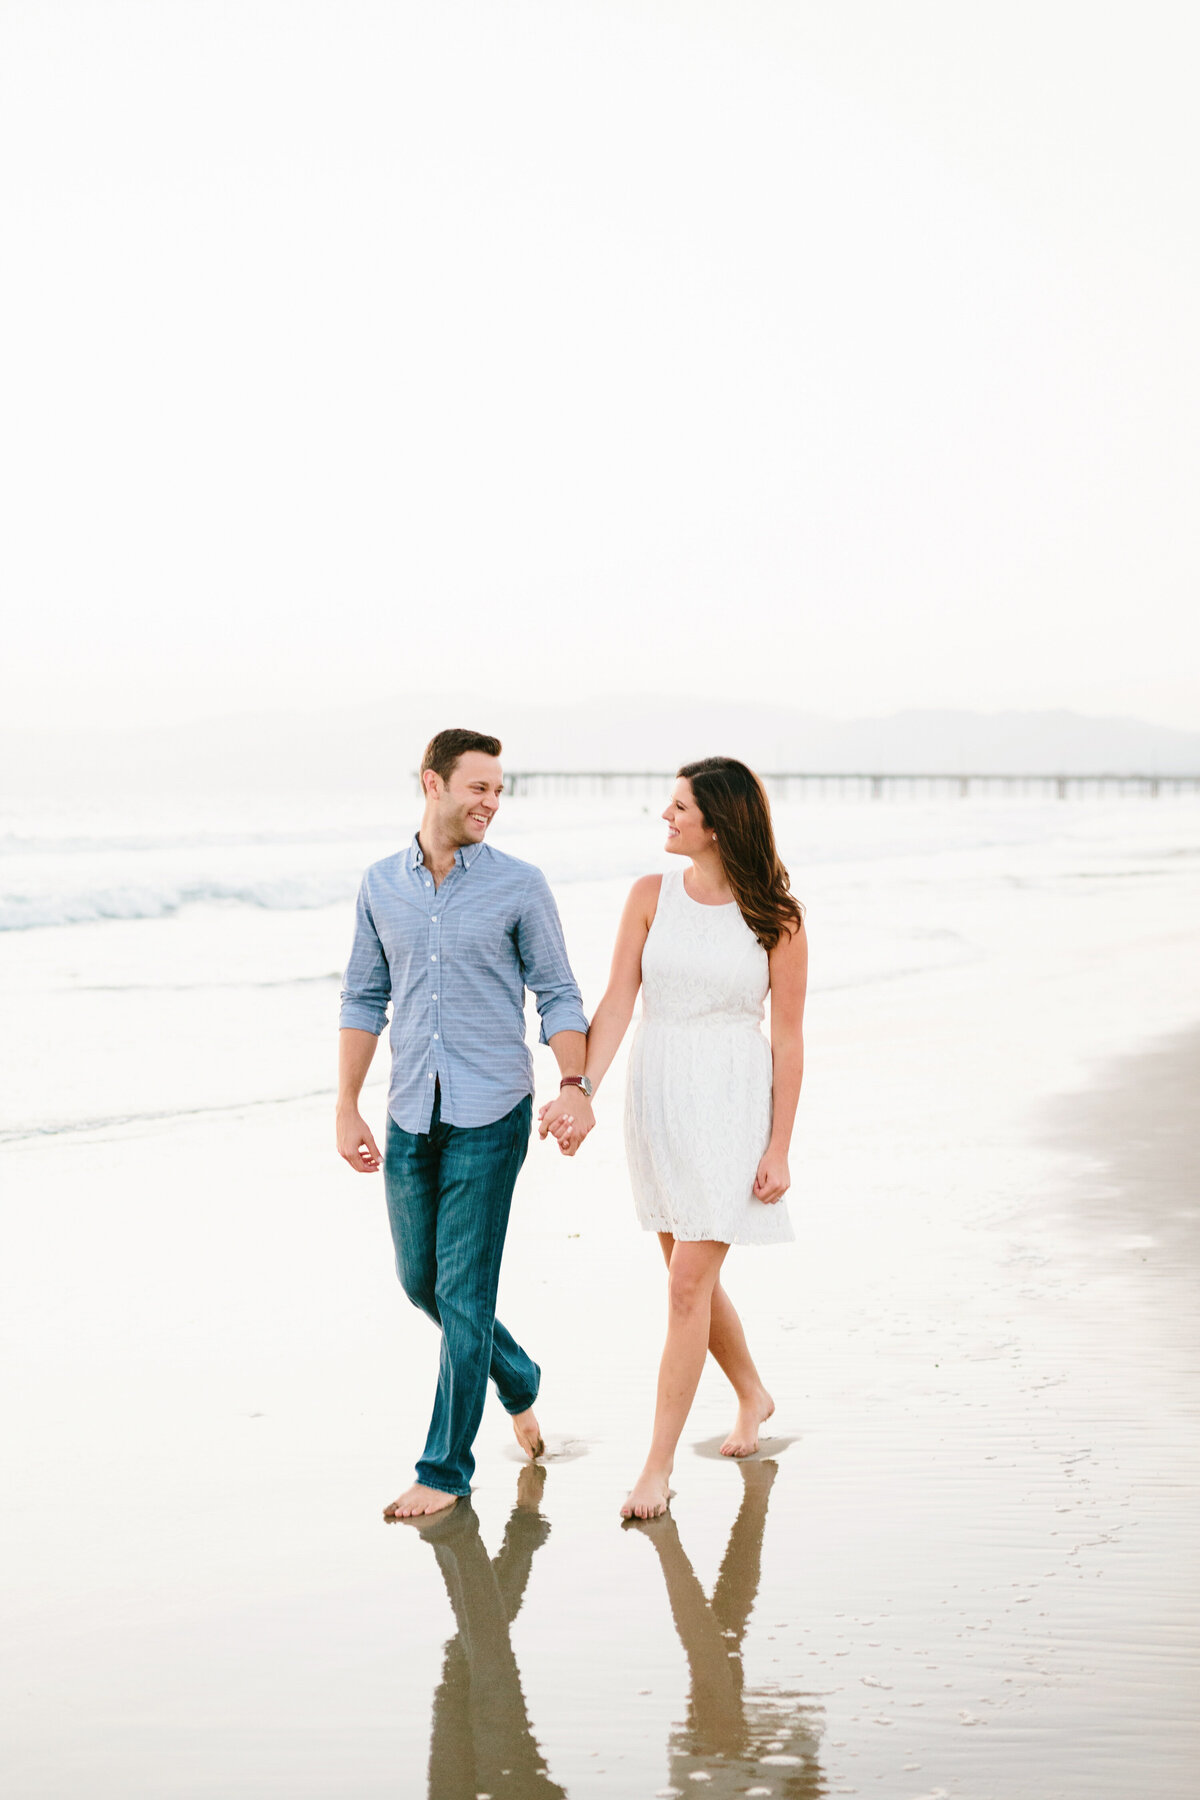 Best California and Texas Engagement Photographer-Jodee Debes Photography-170